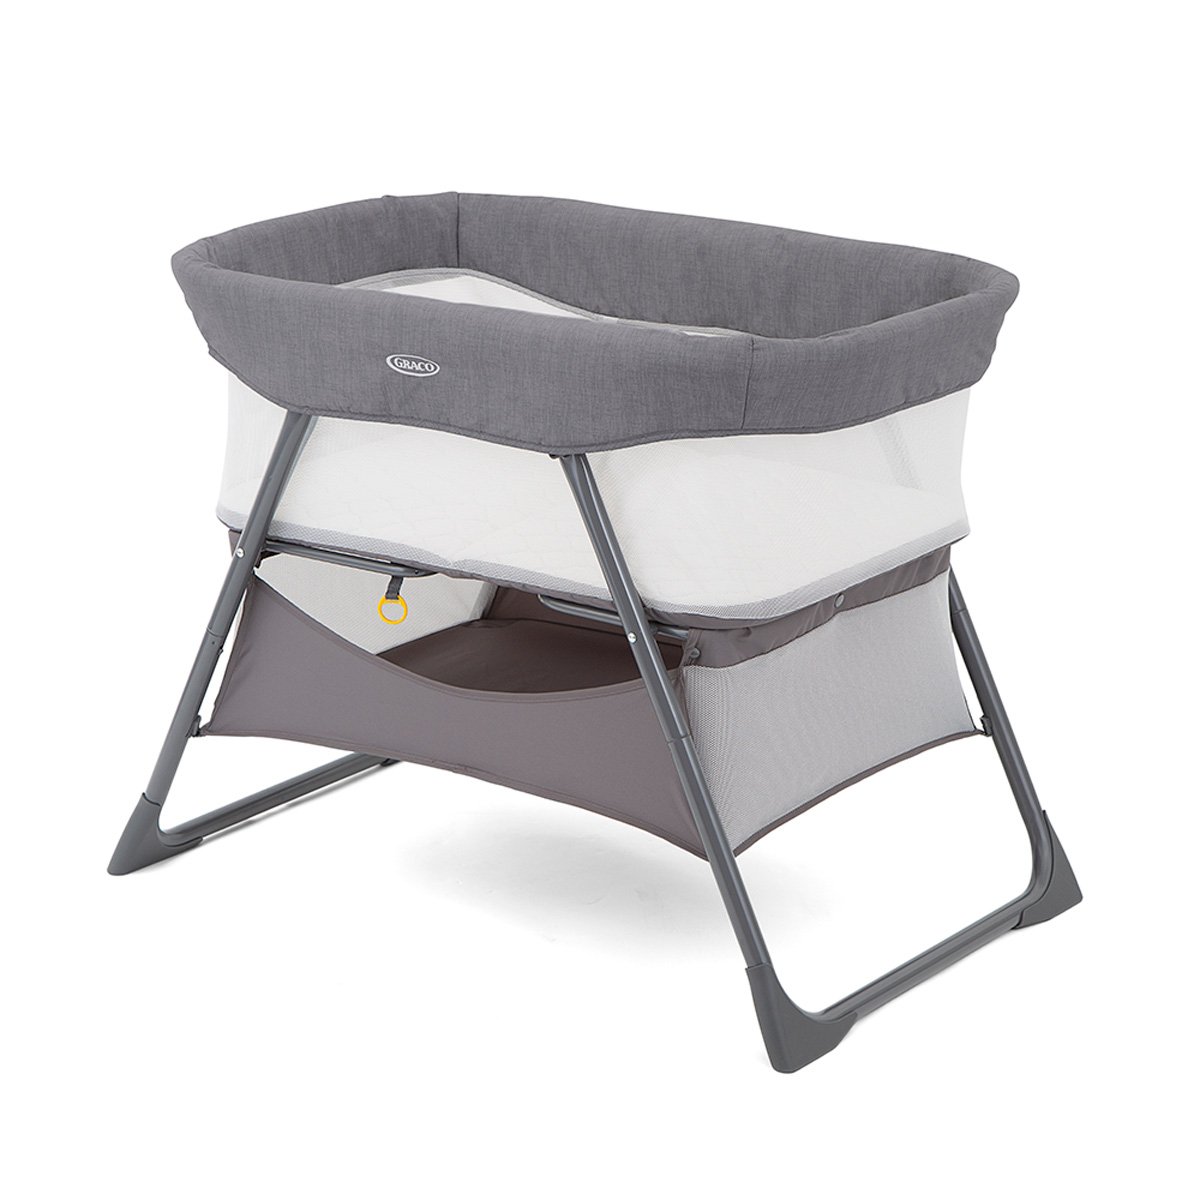 Graco Side-By-Side Bedside Bassinet three-quarter angle on white background.